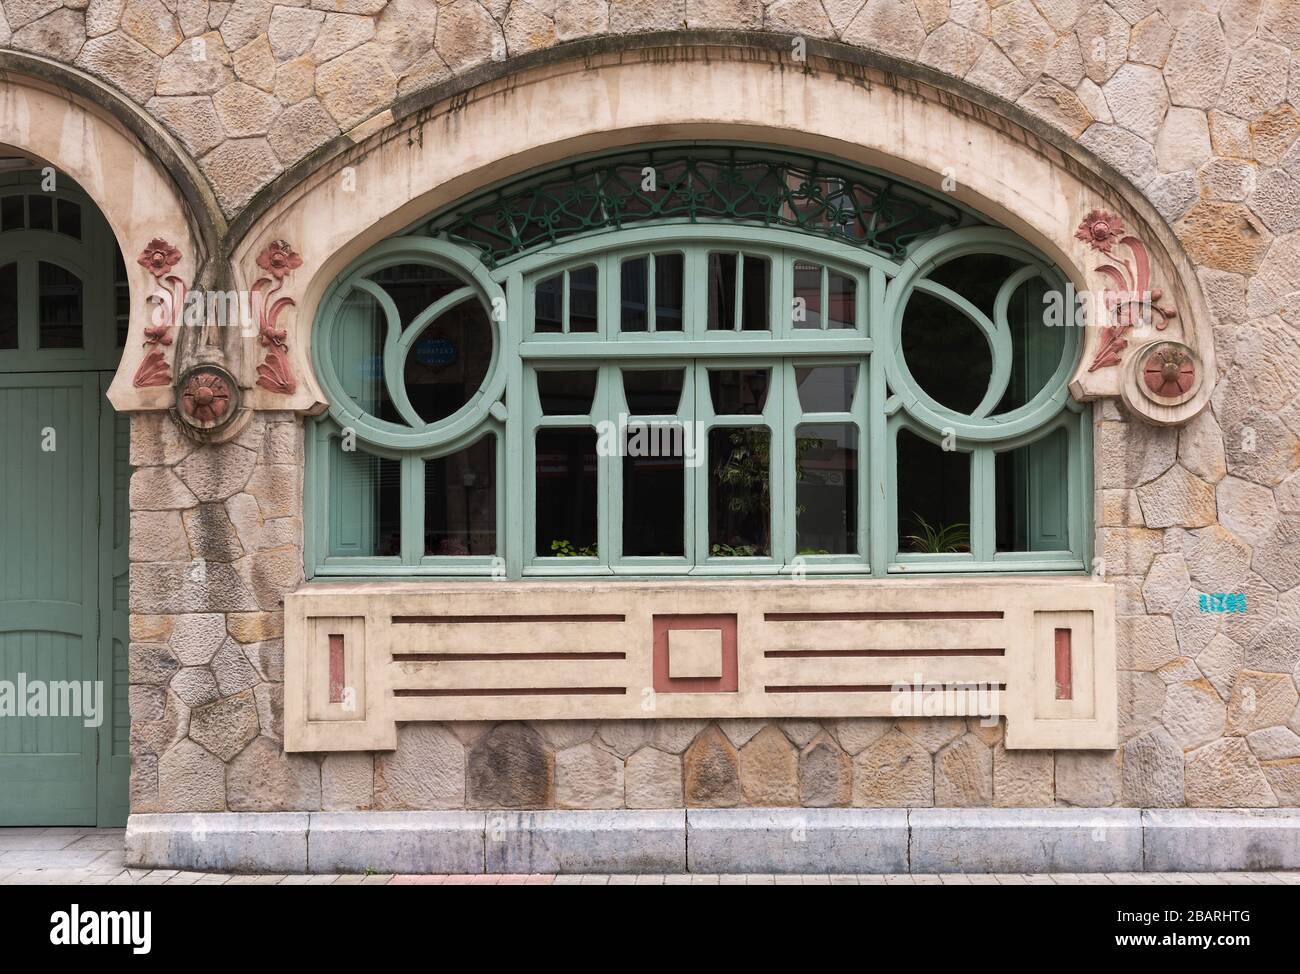 Art nouveau window in the old town of Bilbao, Spain Stock Photo